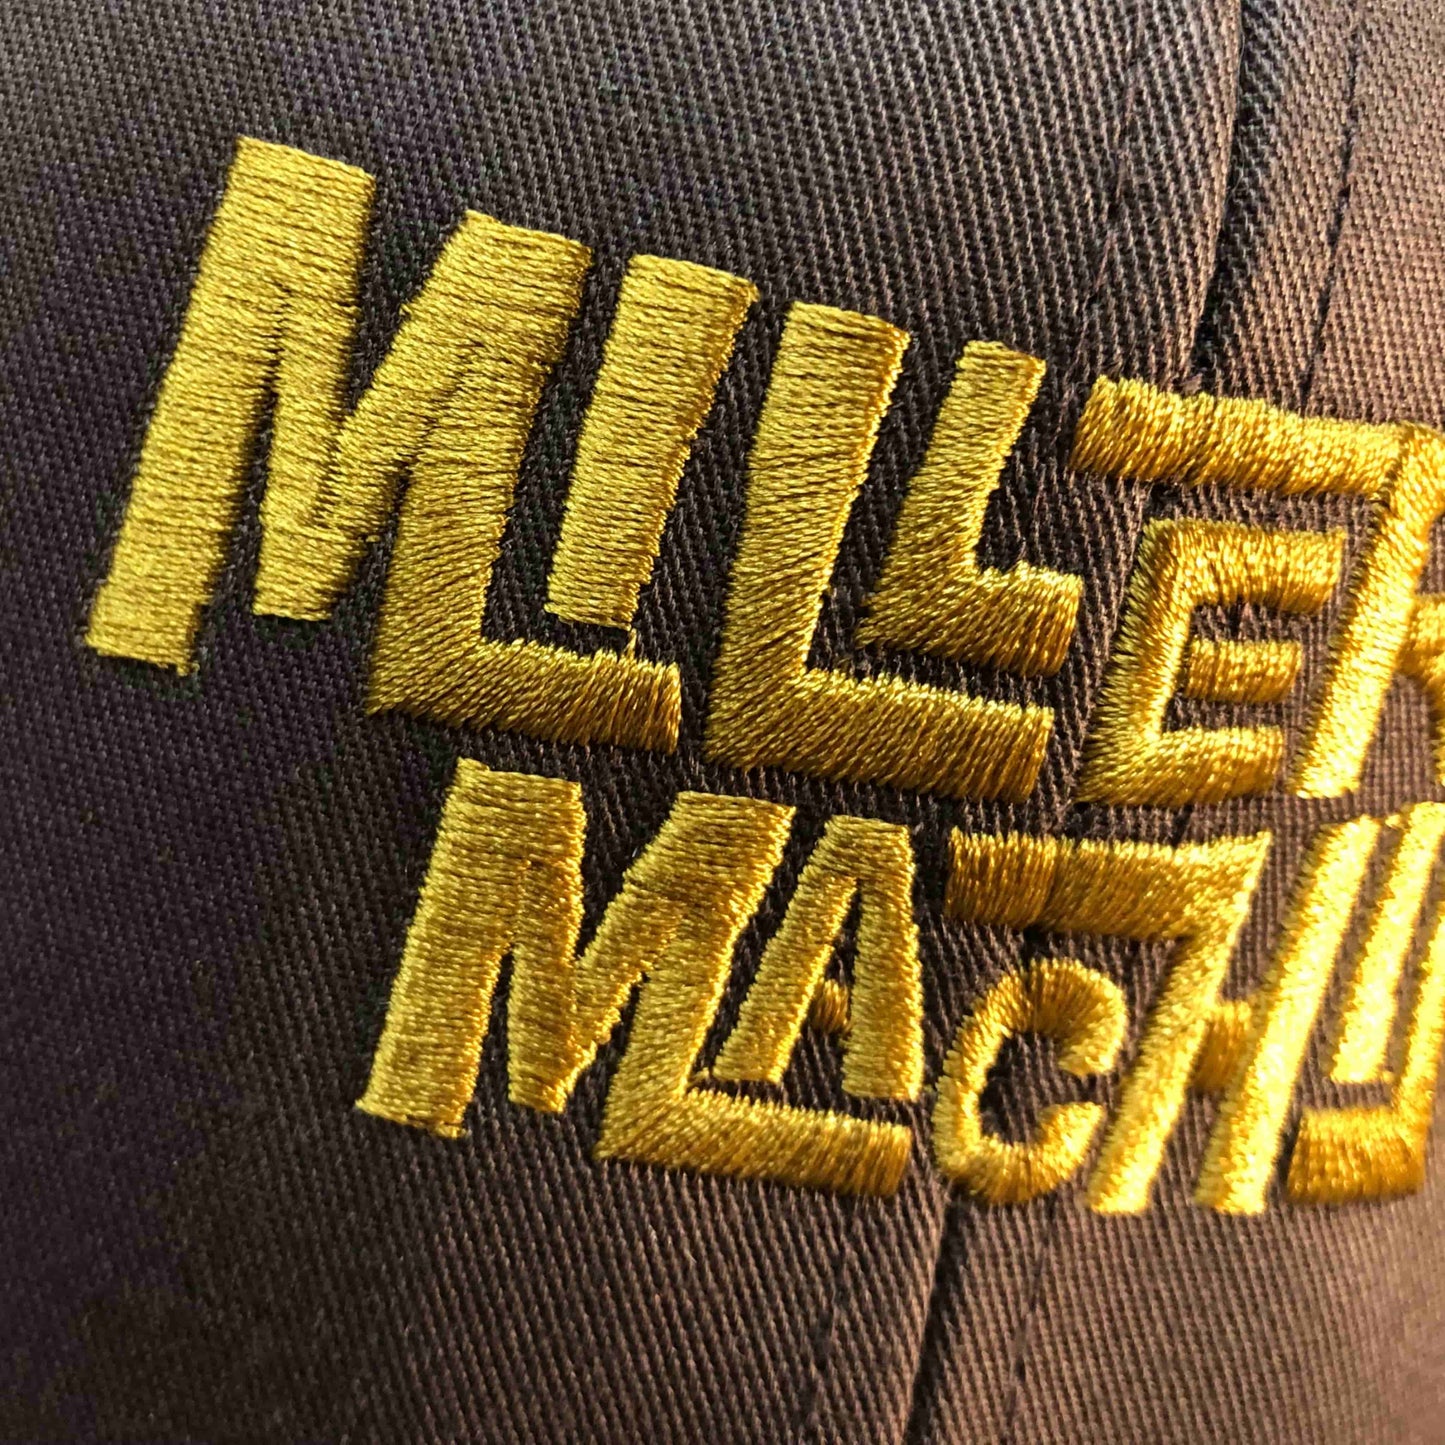 Closeup photo of gold embroidery on the Miller Machine Trucker Cap in brown.